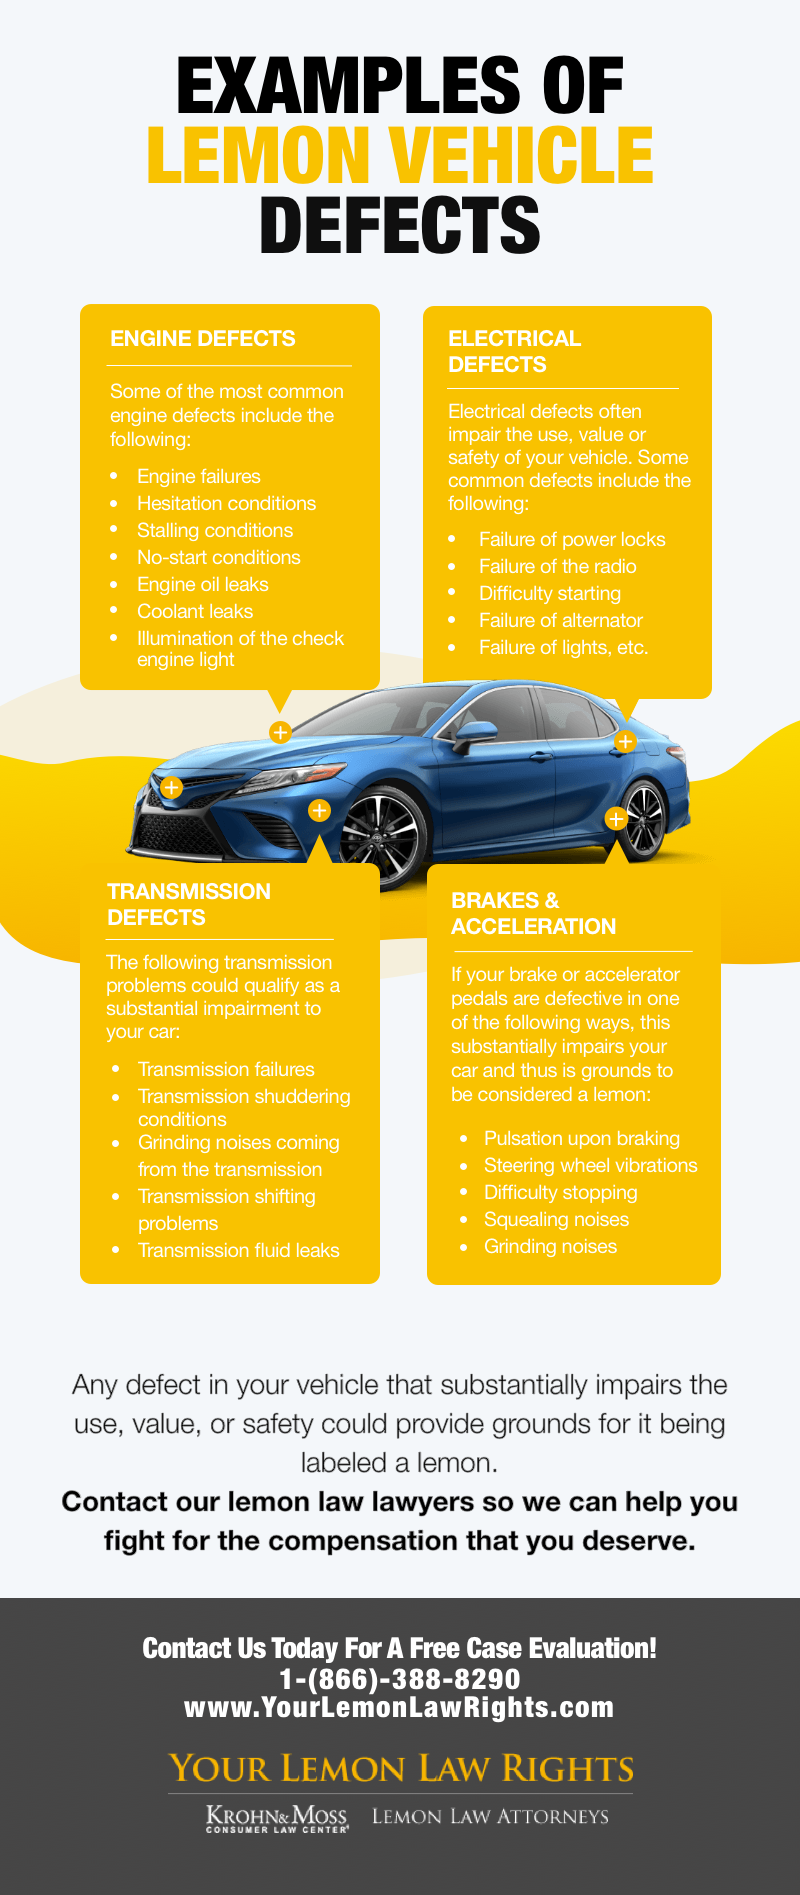 Examples of Lemon Law Defects Your Lemon Law Rights®